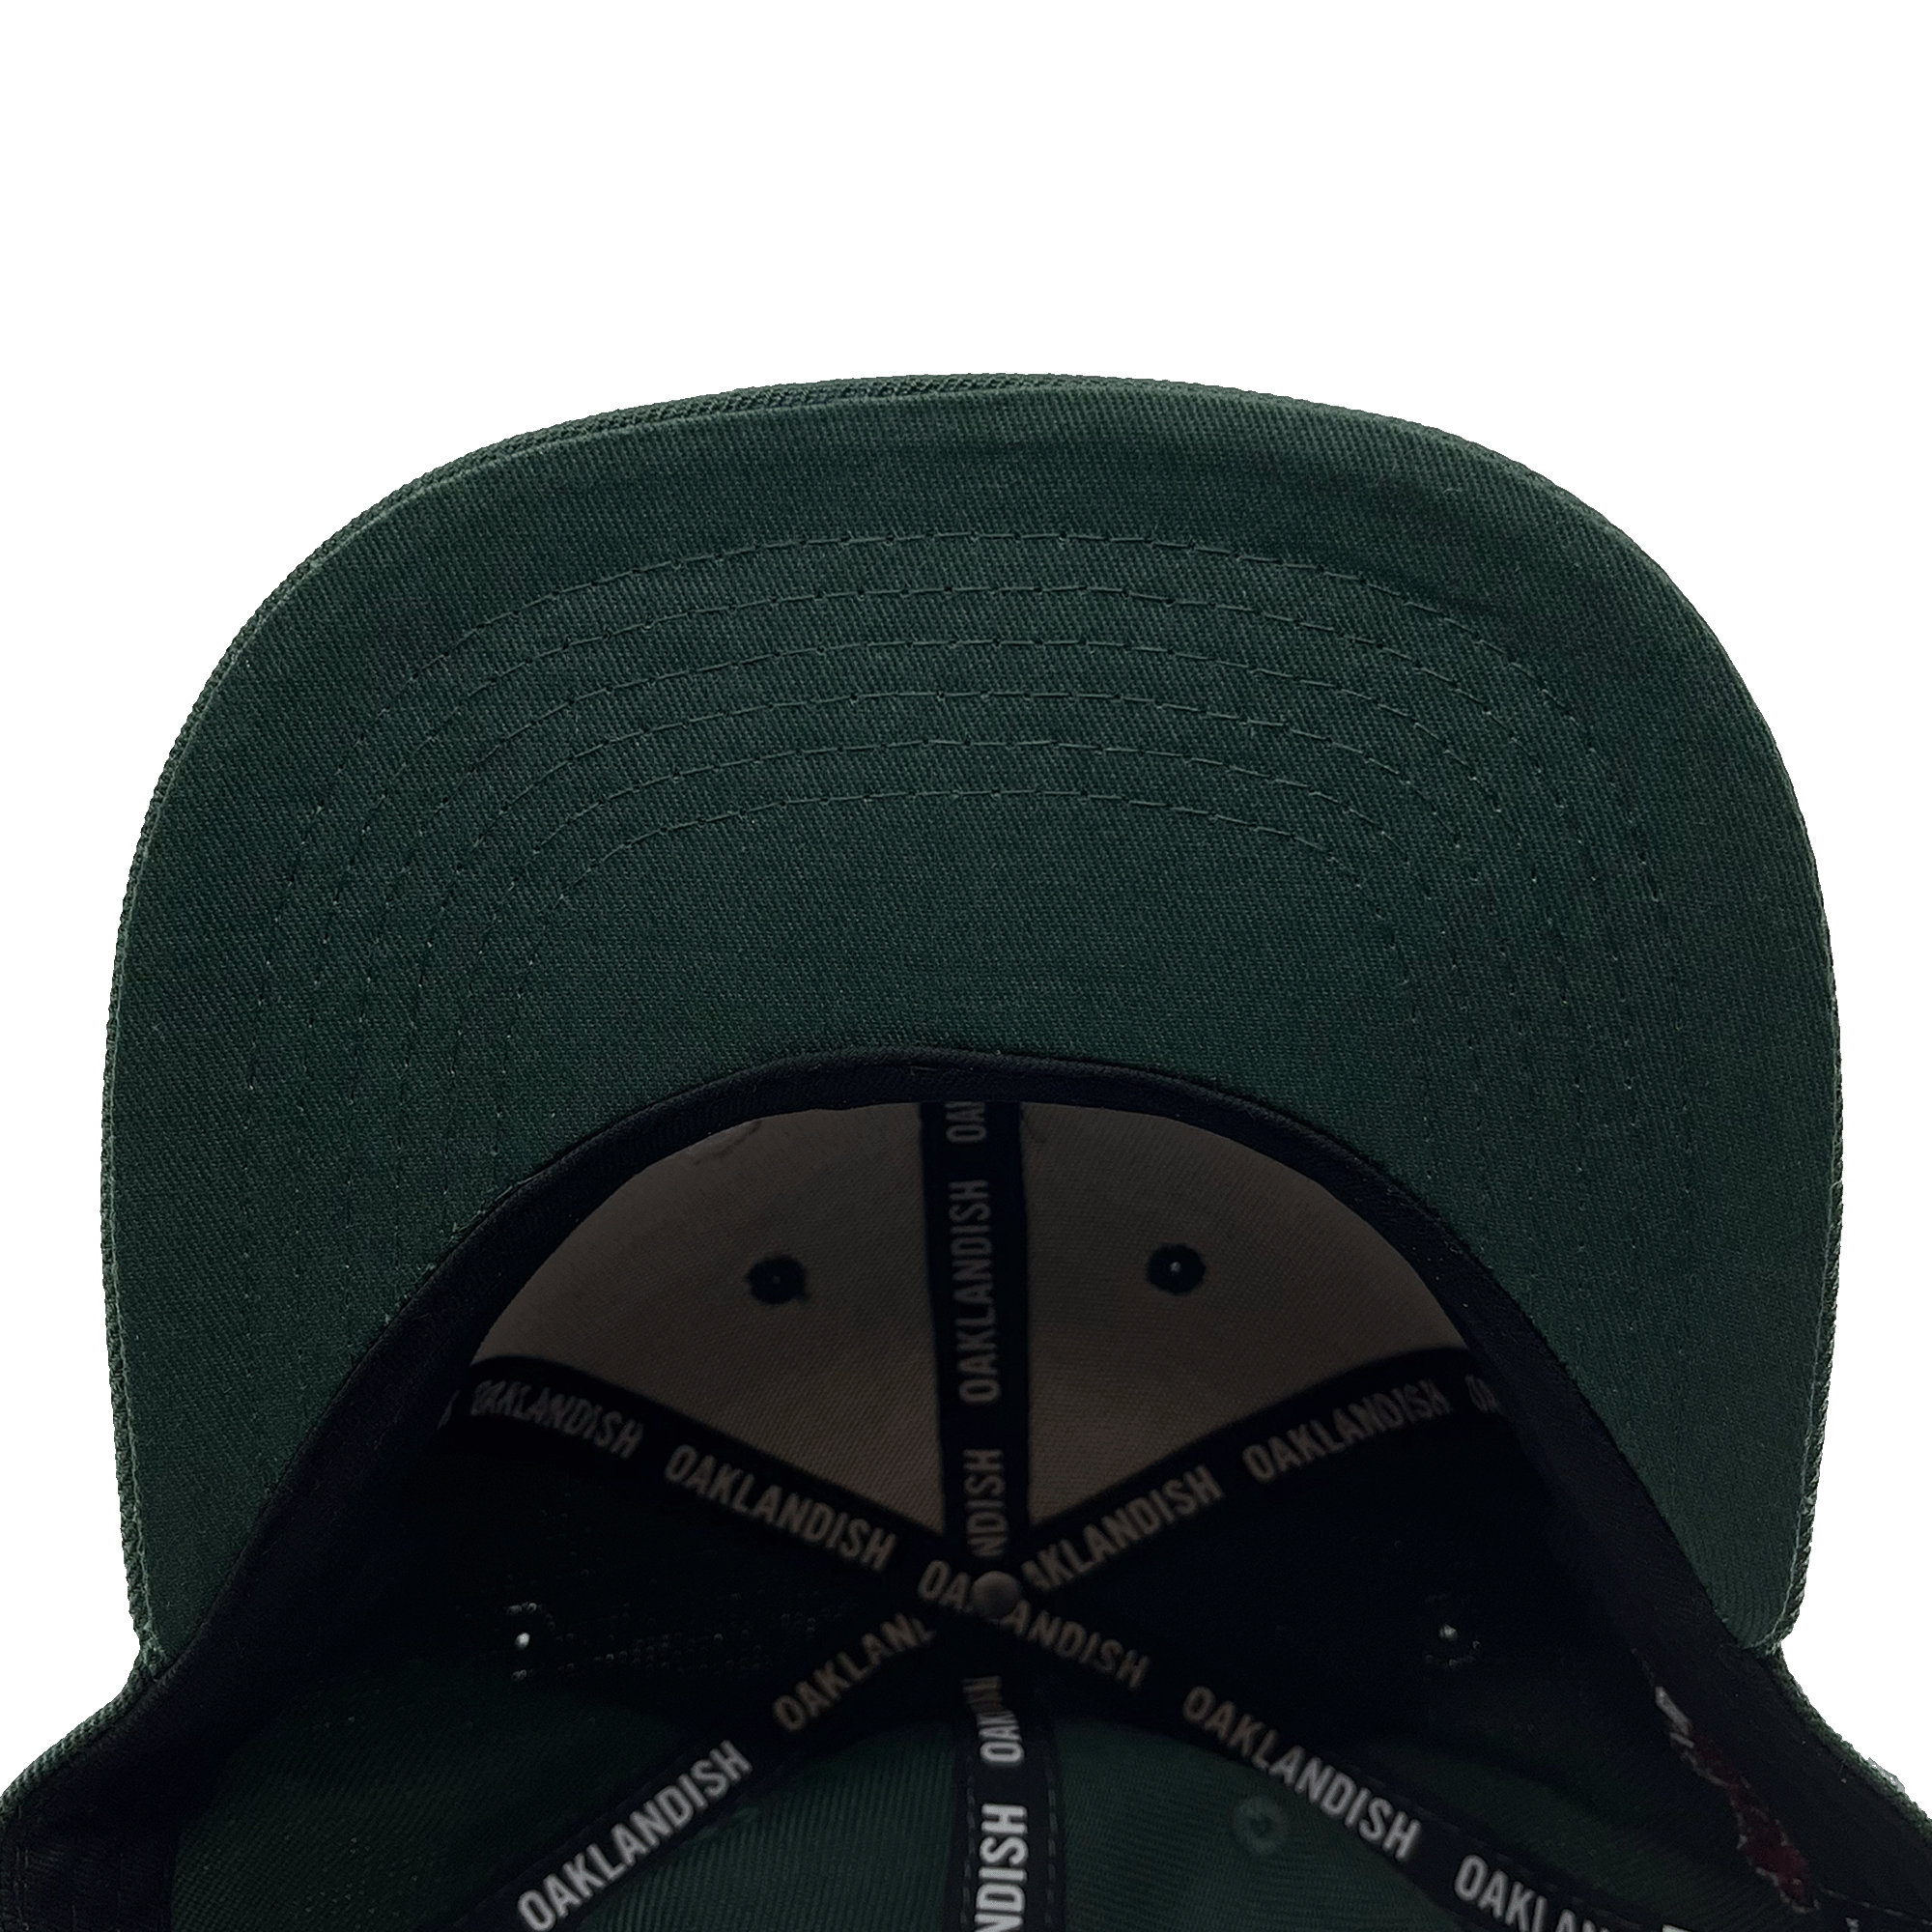 View of the underside of the green bill of a green cap with black striping and Oaklandish wordmark on repeat inside the crown.